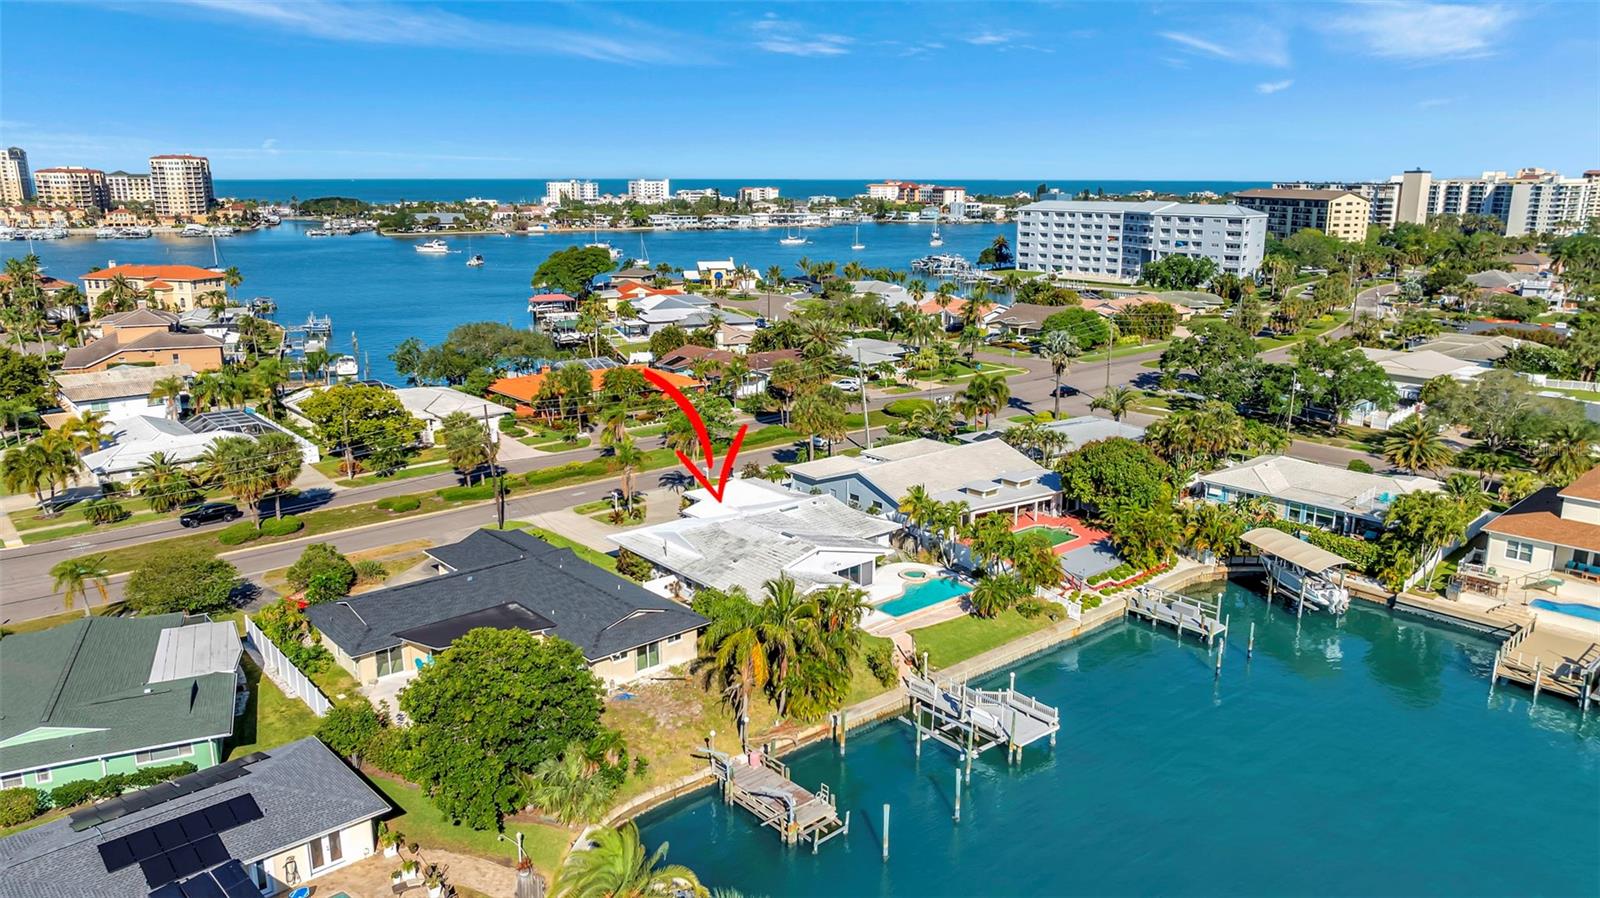 See our property from a bird's eye view! Feel the calm of the water and the warmth of the community surrounding it.